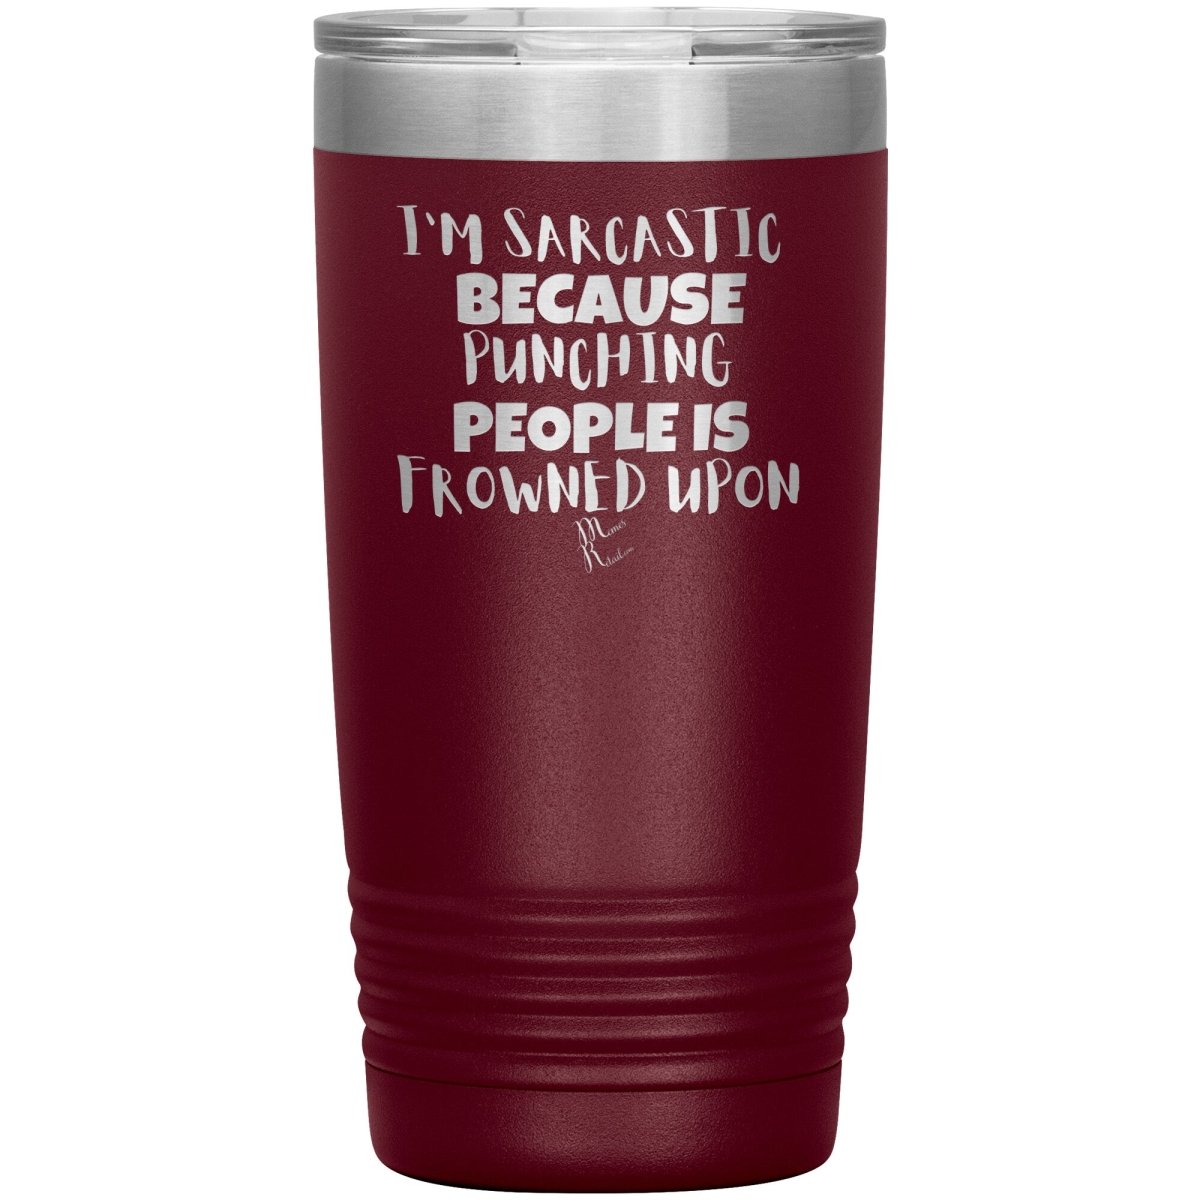 I'm Sarcastic Because Punching People is Frowned Upon Tumblers, 20oz Insulated Tumbler / Maroon - MemesRetail.com